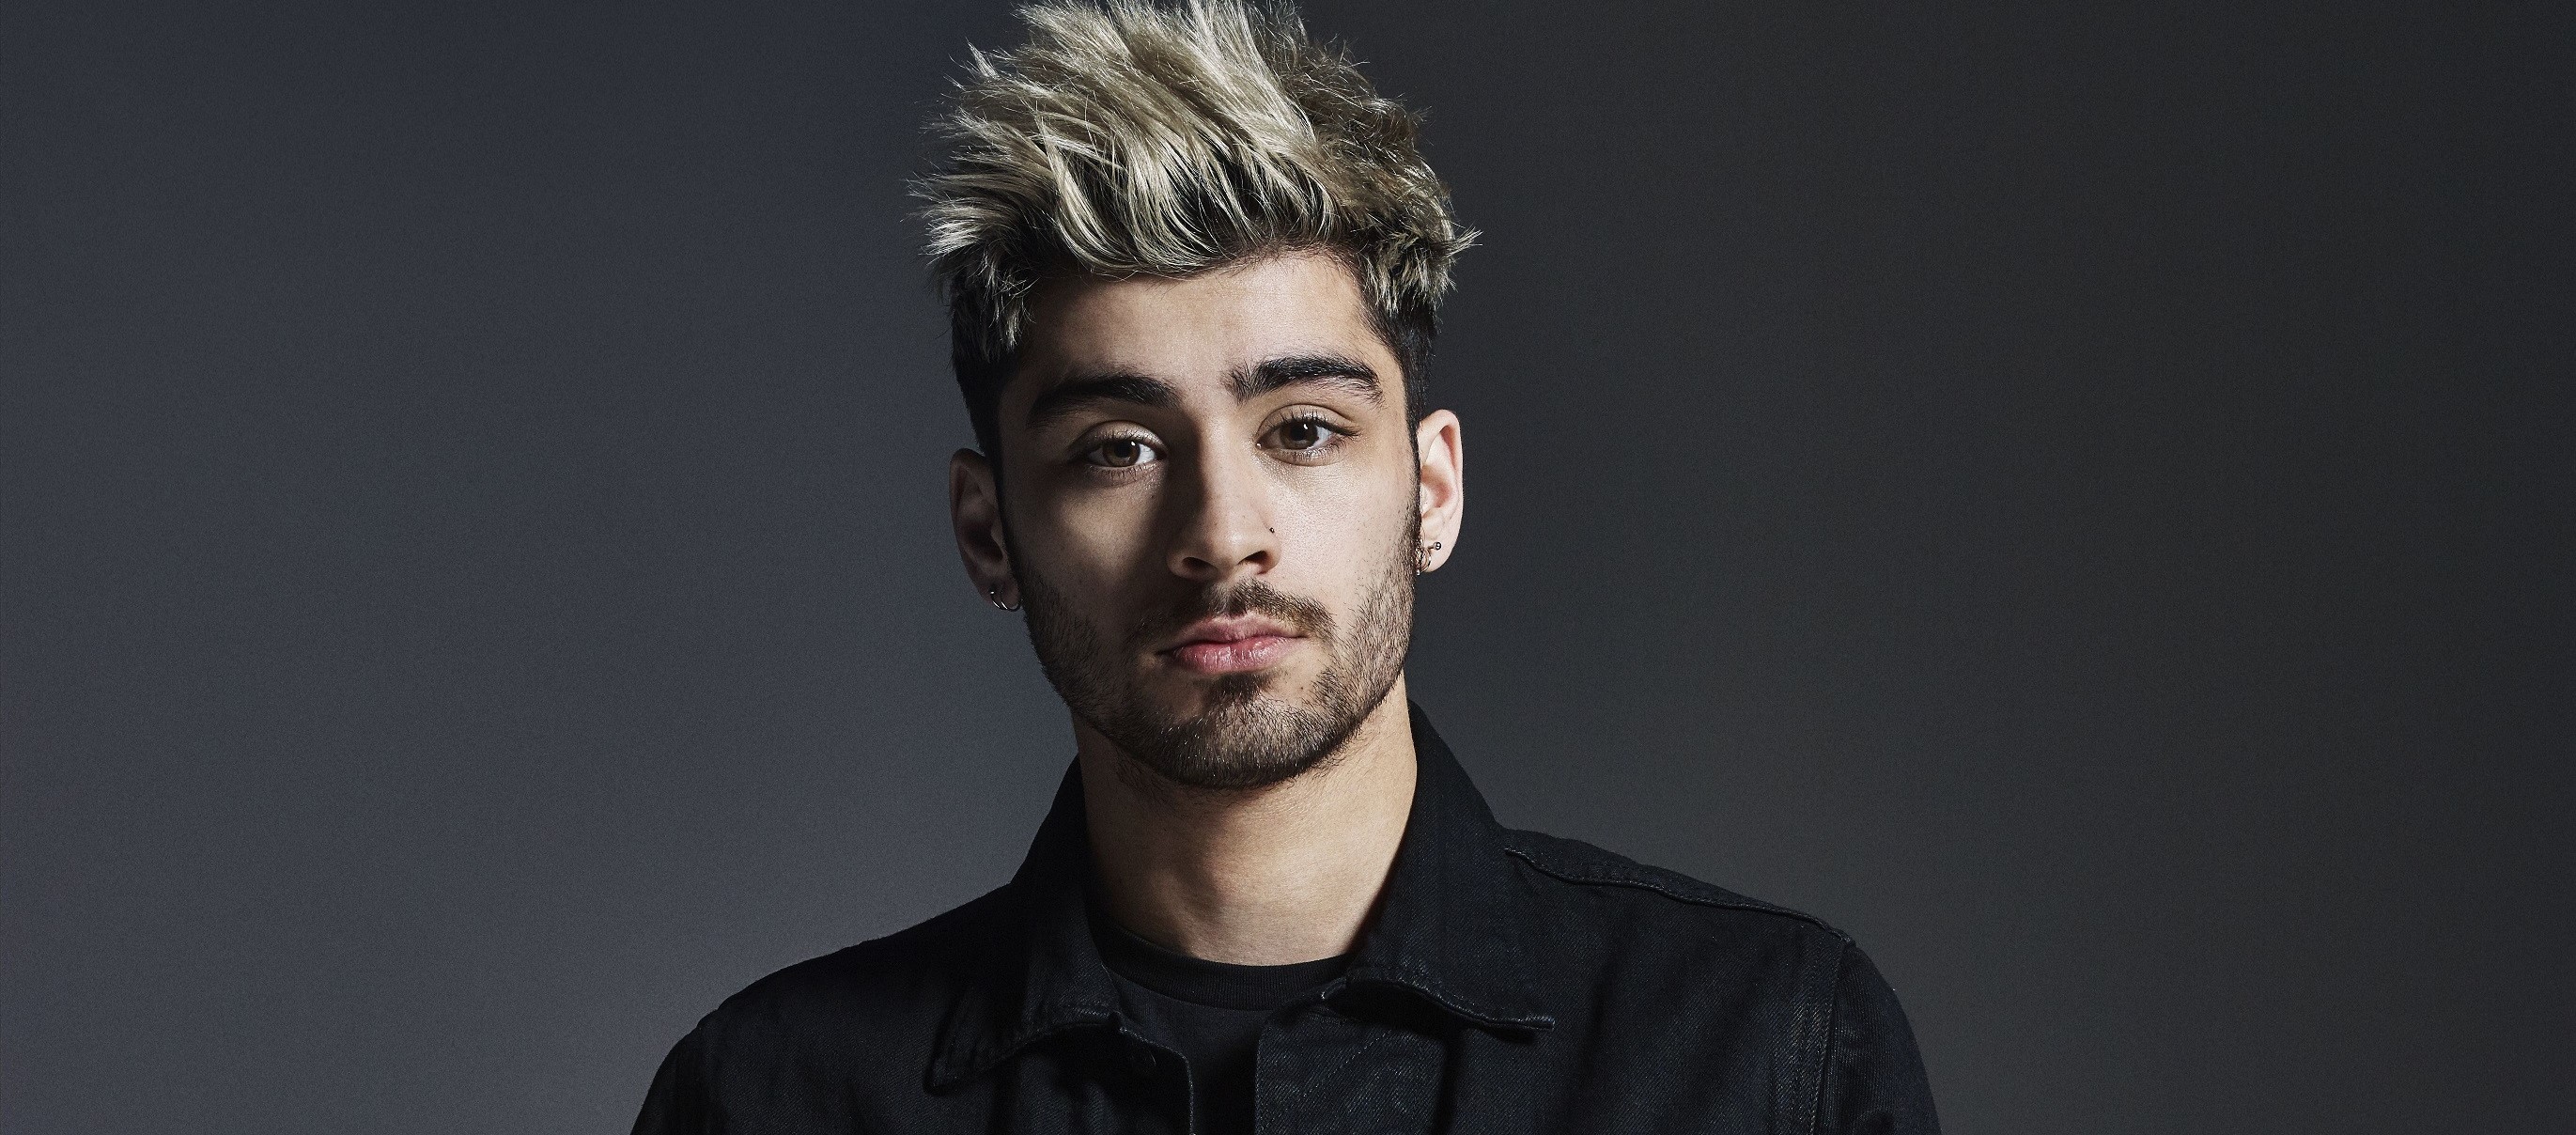 ZAYN DEBUTS AT #1 ON THE ARIA SINGLES CHART!